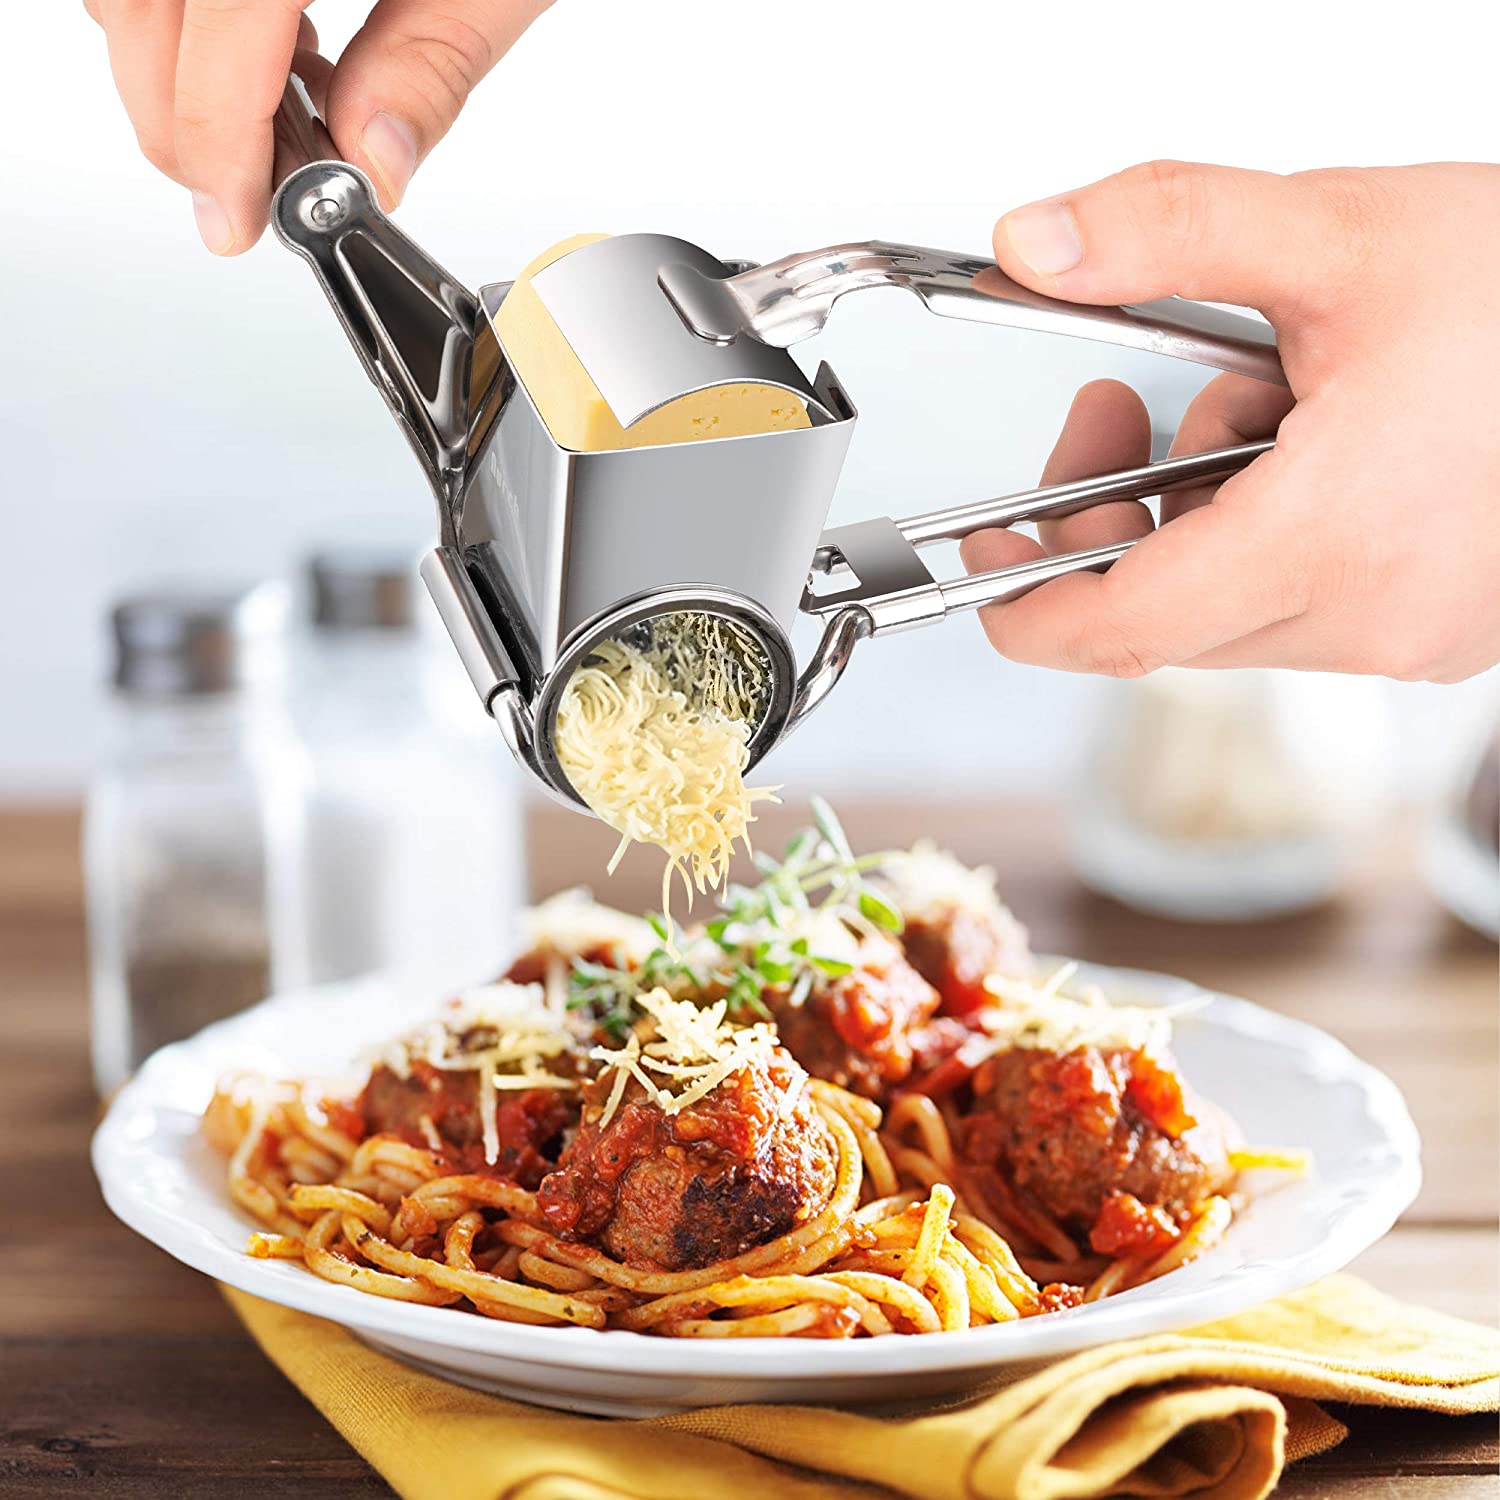 Rotary Cheese Grater - Khmer Kitchen Handheld Cheese Grater With